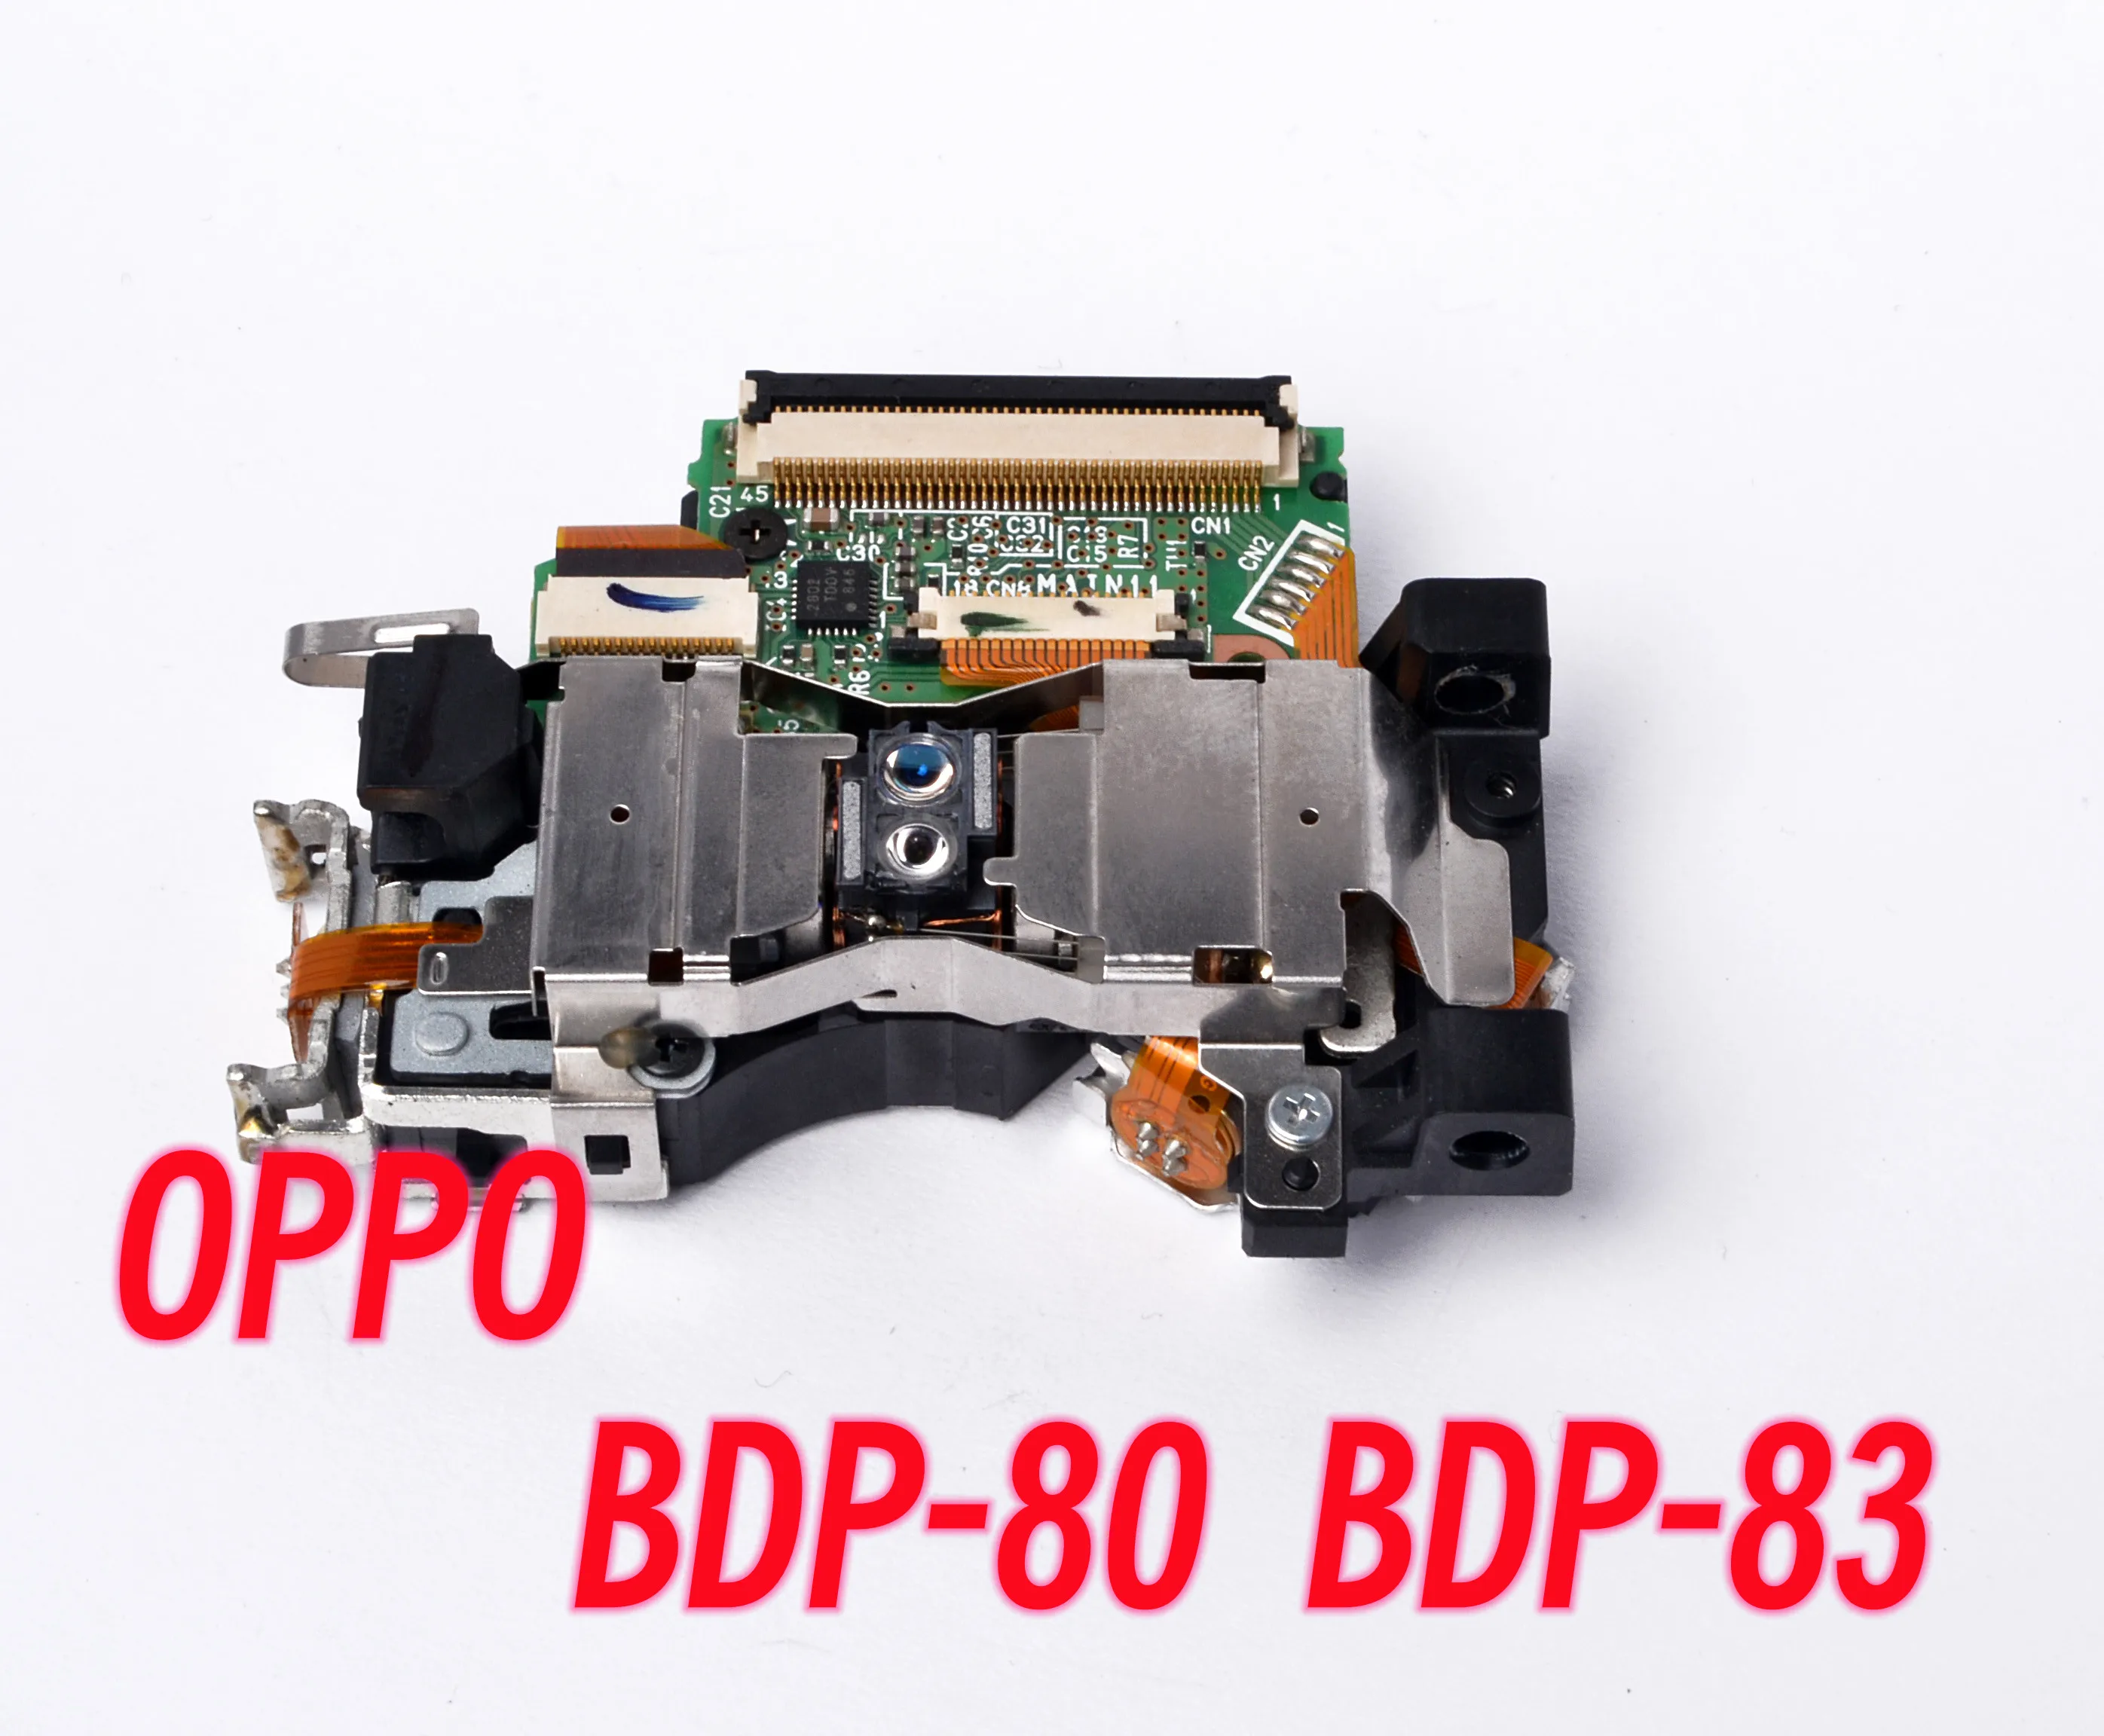 

Unit for OPPO BDP80 BDP83 BDP80 BDP-83 Brand New Blu-ray Radio Player Laser Lens Lasereinheit Optical Pick-ups Bloc Optique